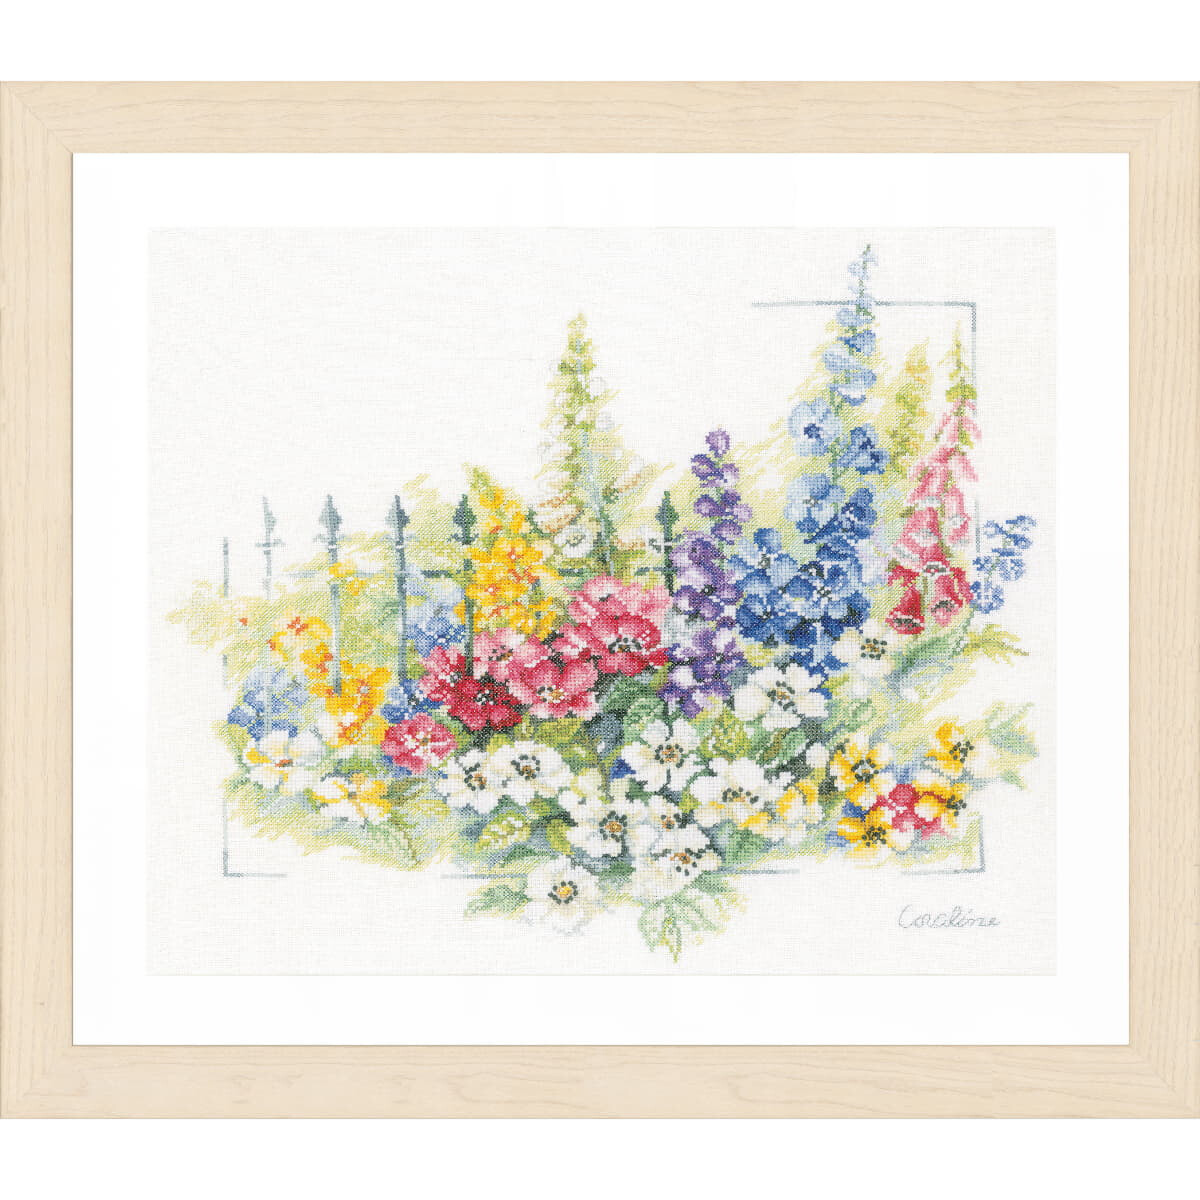 Lanarte counted cross stitch kit "Home and garden...